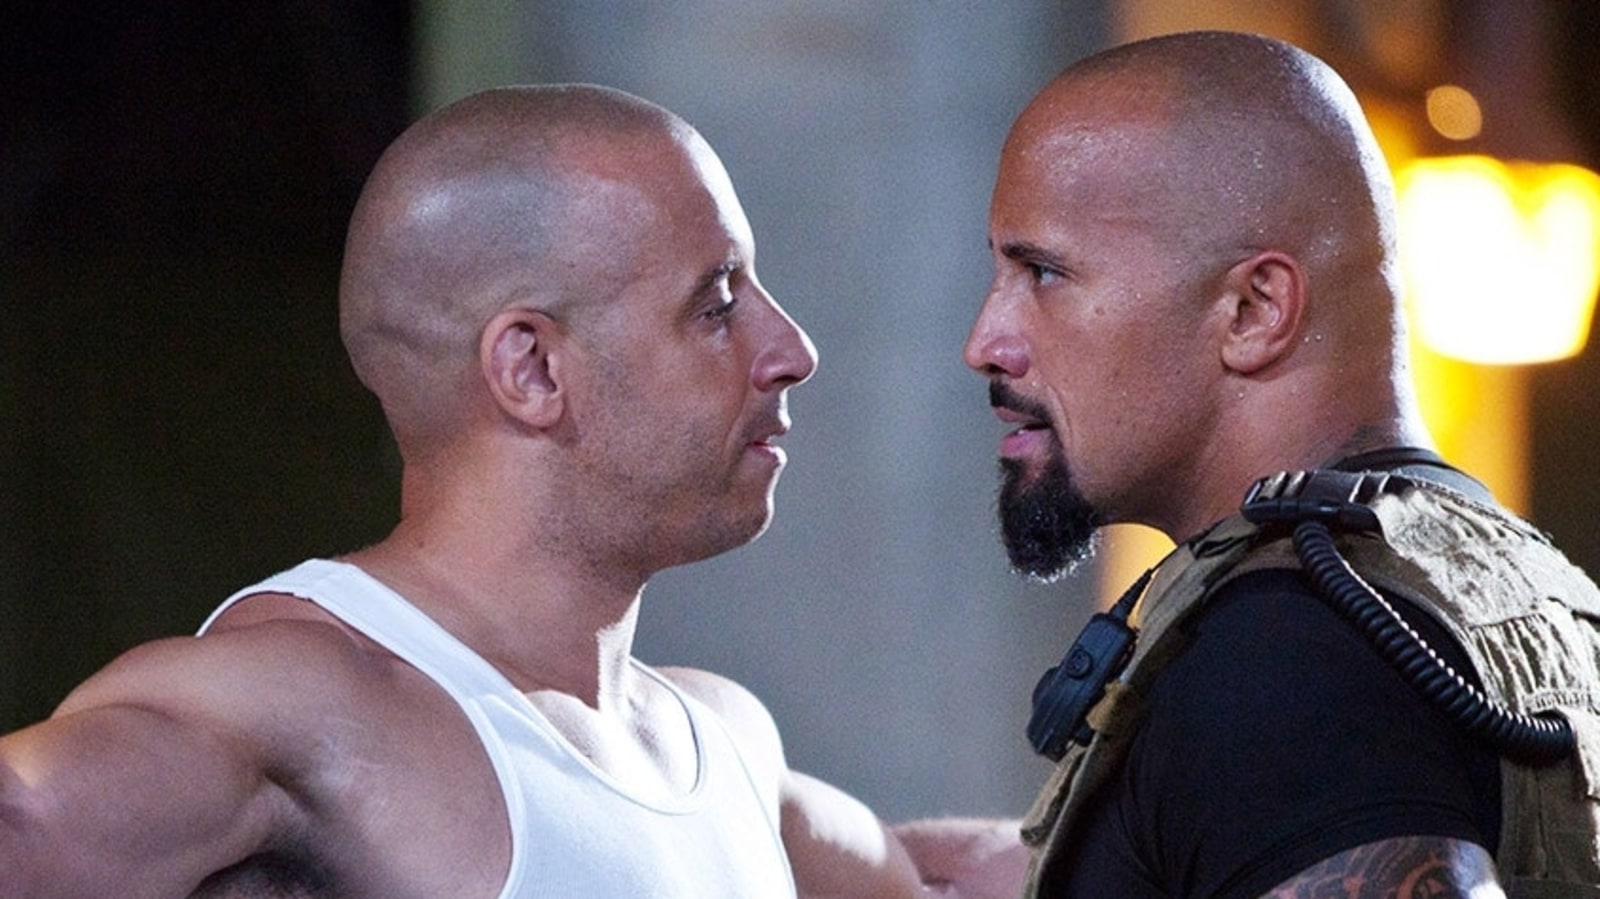 Vin Diesel's On-Set Behavior Has Caused Problems In The Past